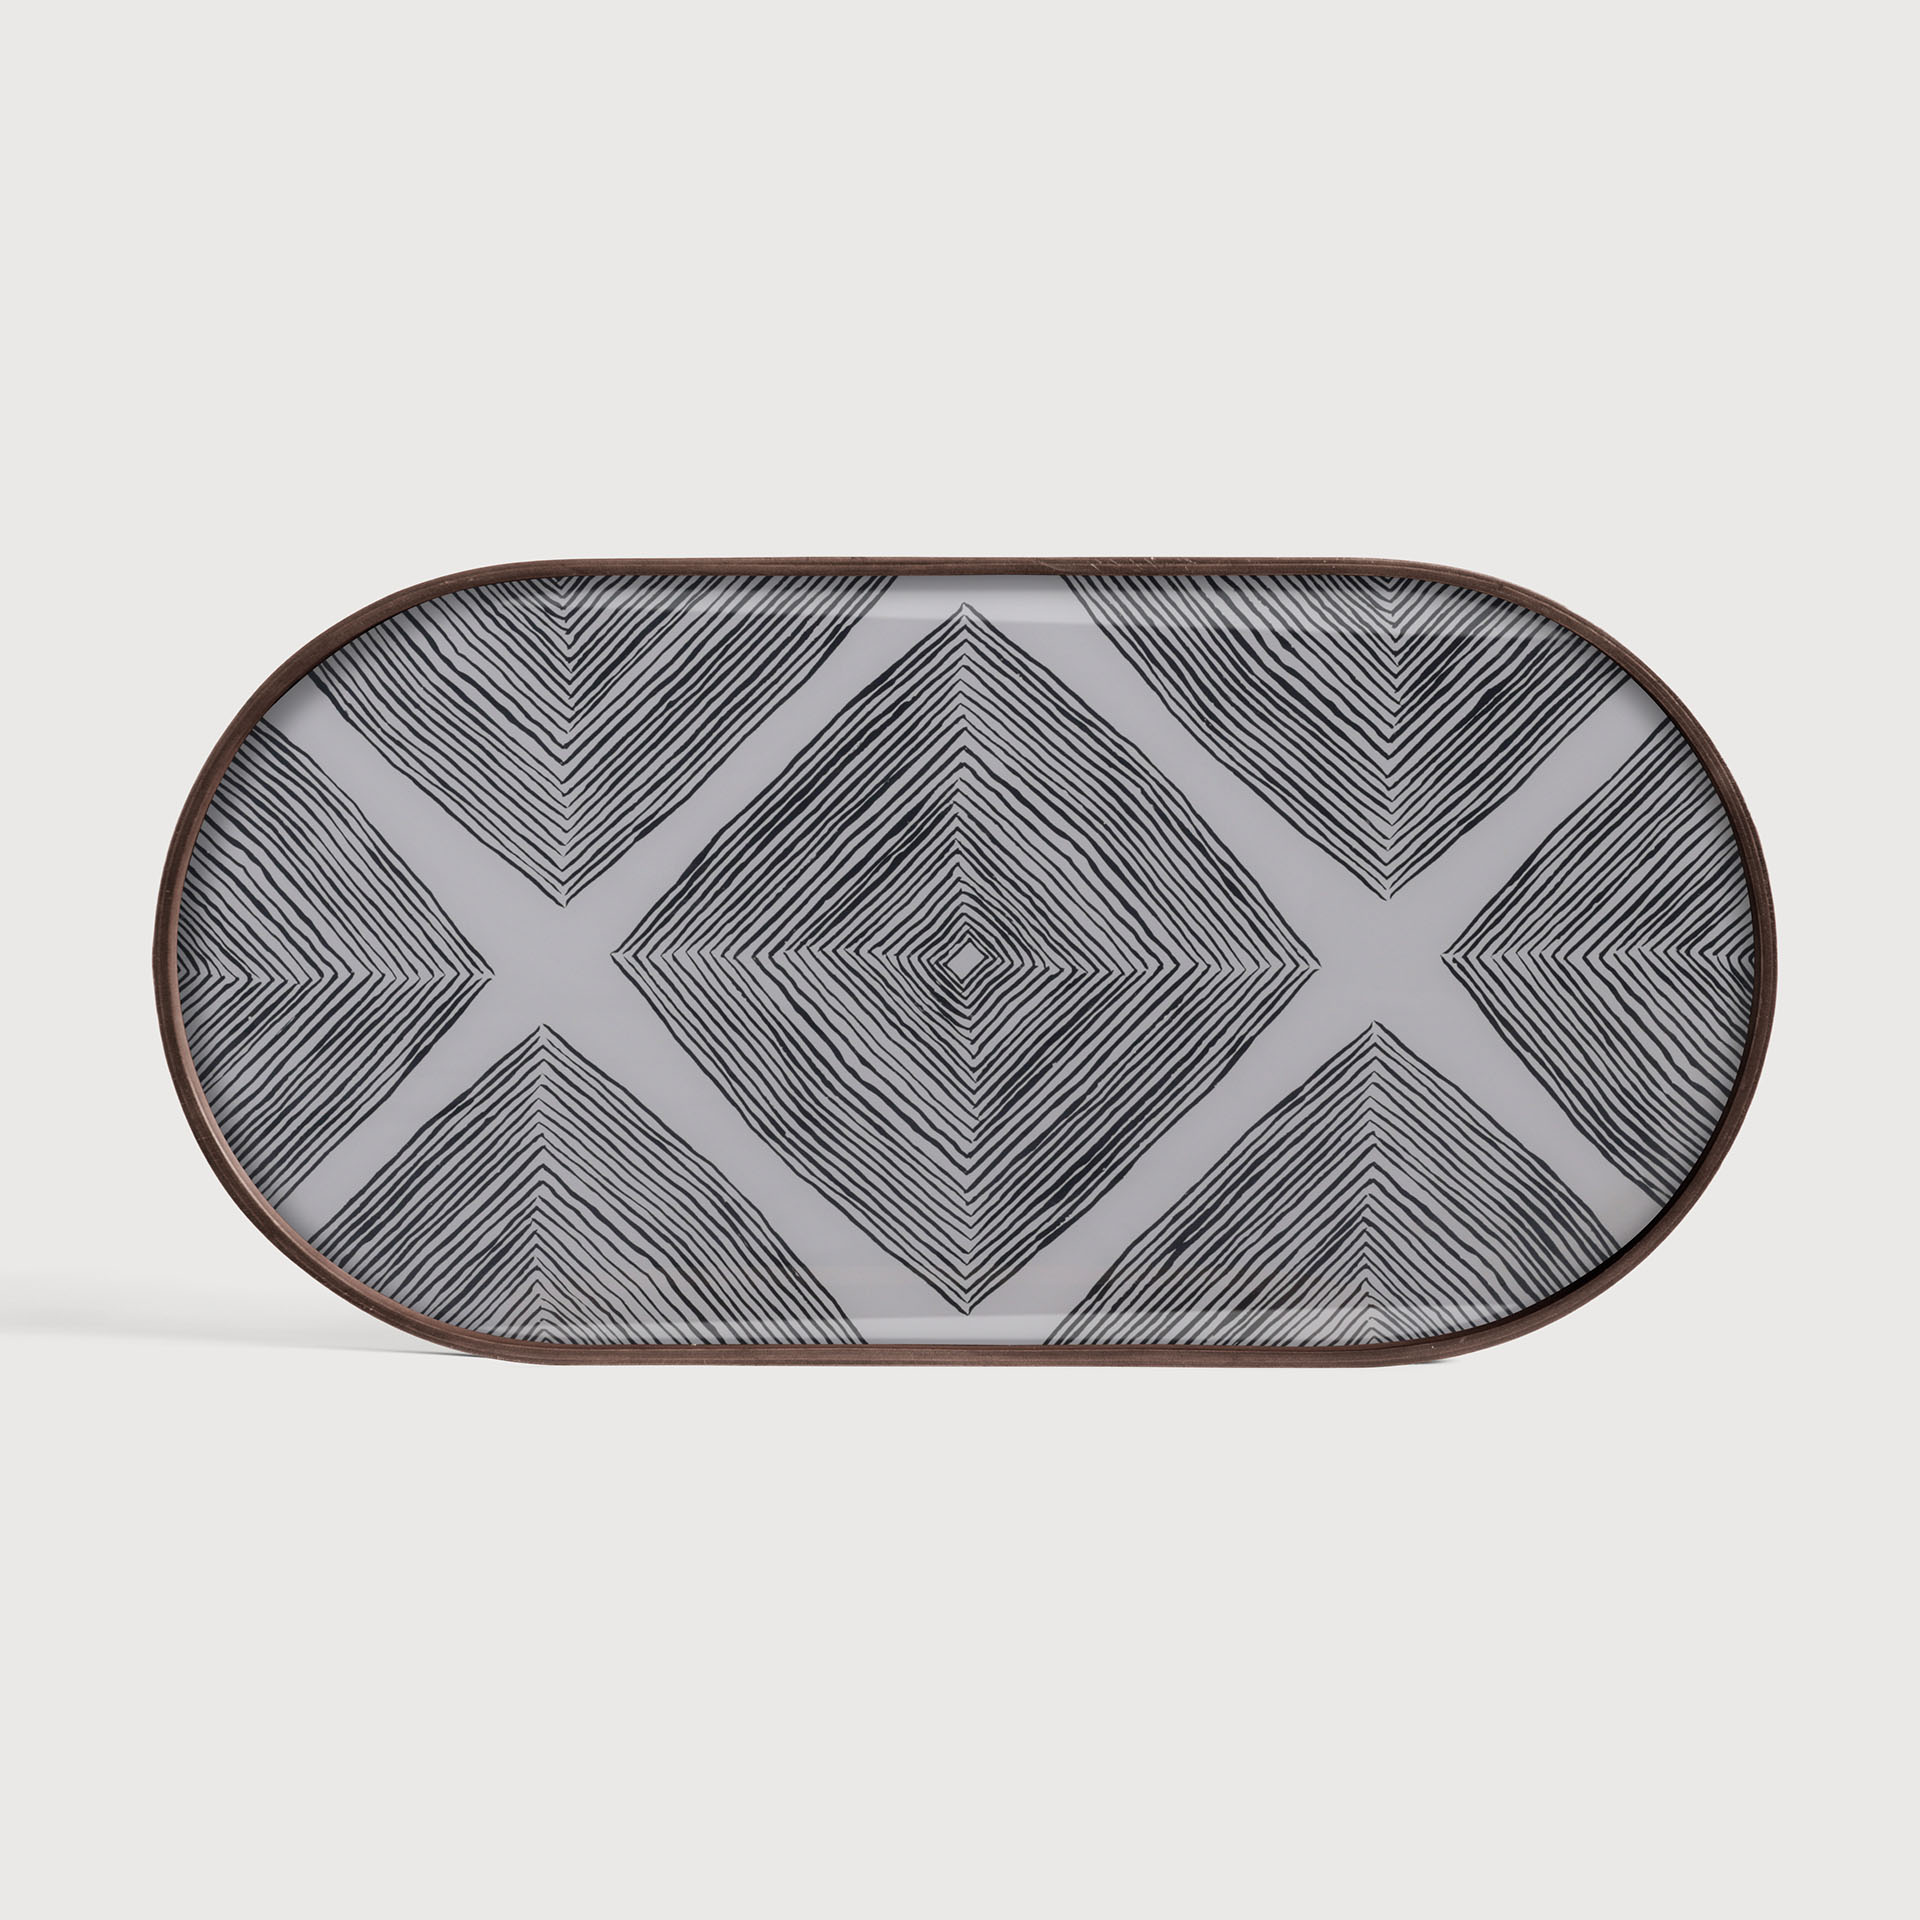 [20916] Slate Linear Squares glass tray 